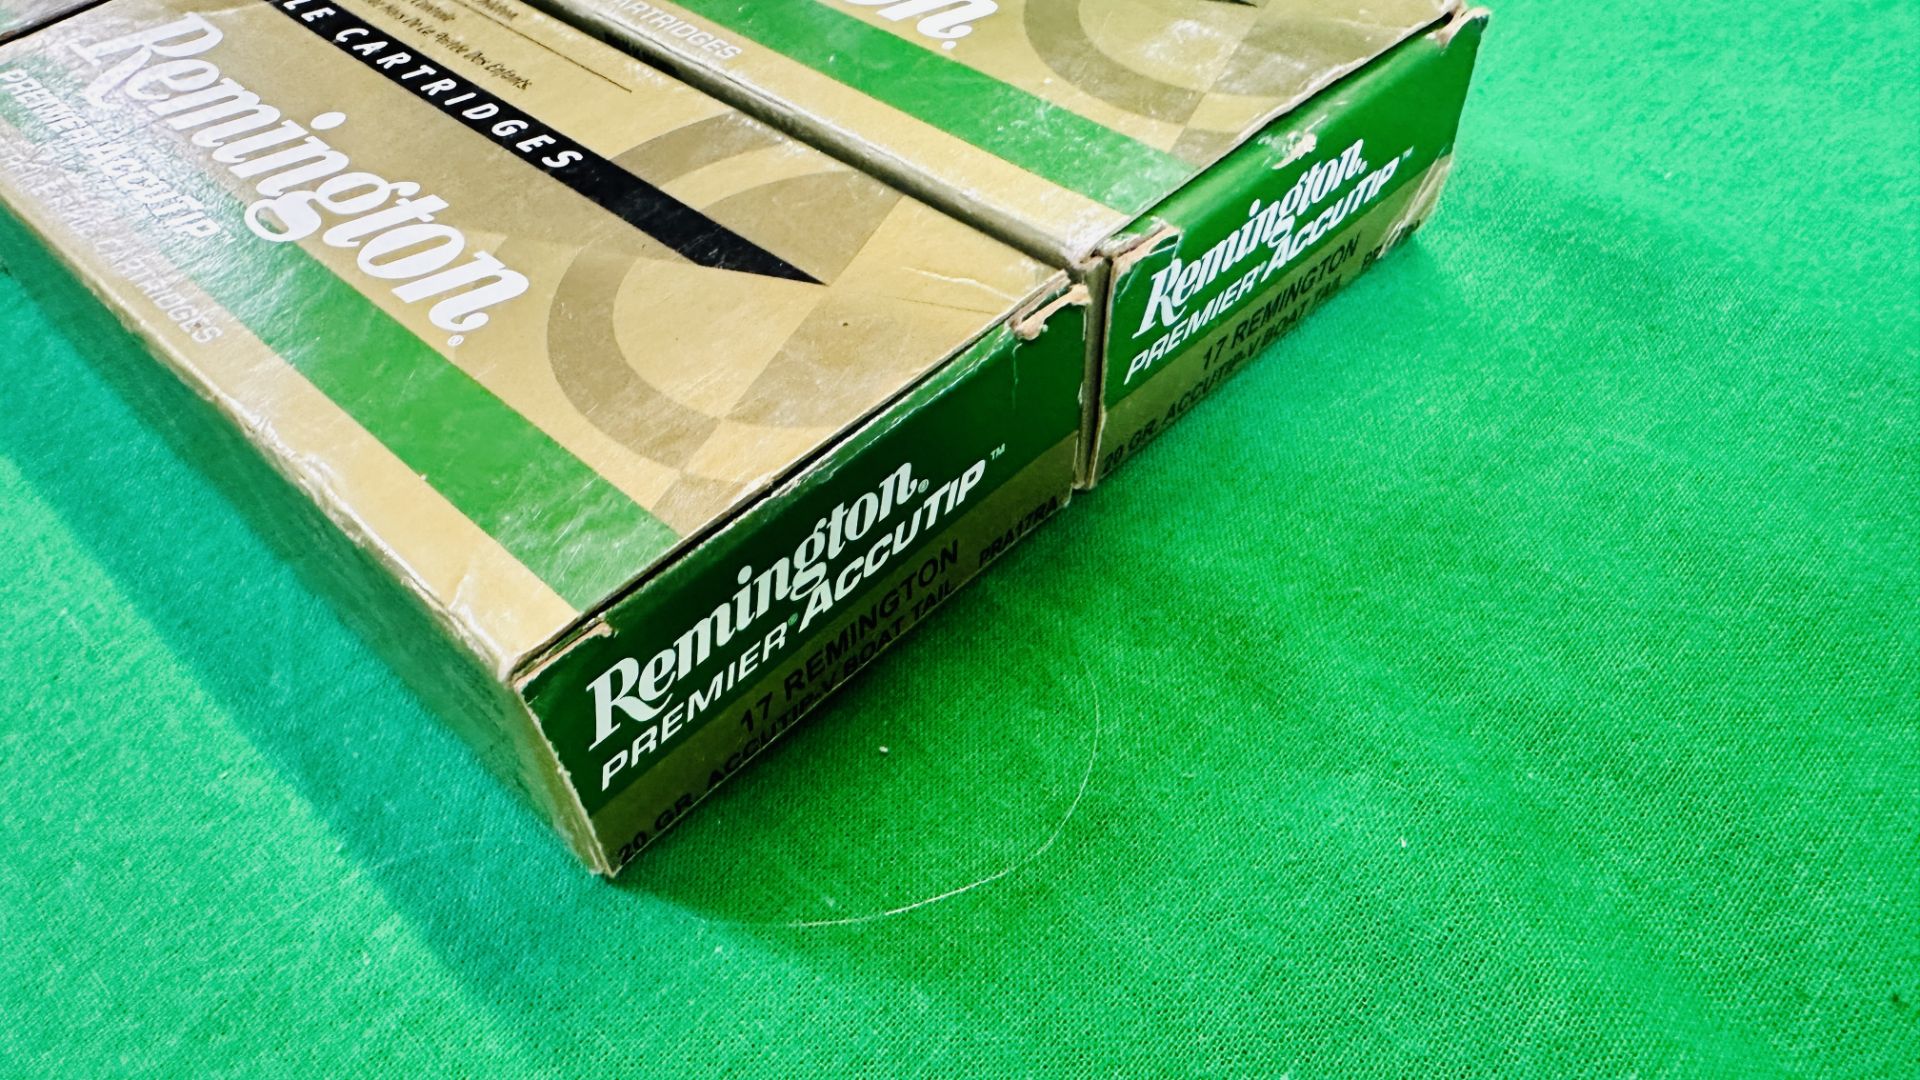 80 X REMINGTON 17 PREMIER ACCUTIP 20 GR RIFLE AMMUNITION - (REF: 1431) - (TO BE COLLECTED IN PERSON - Image 2 of 4